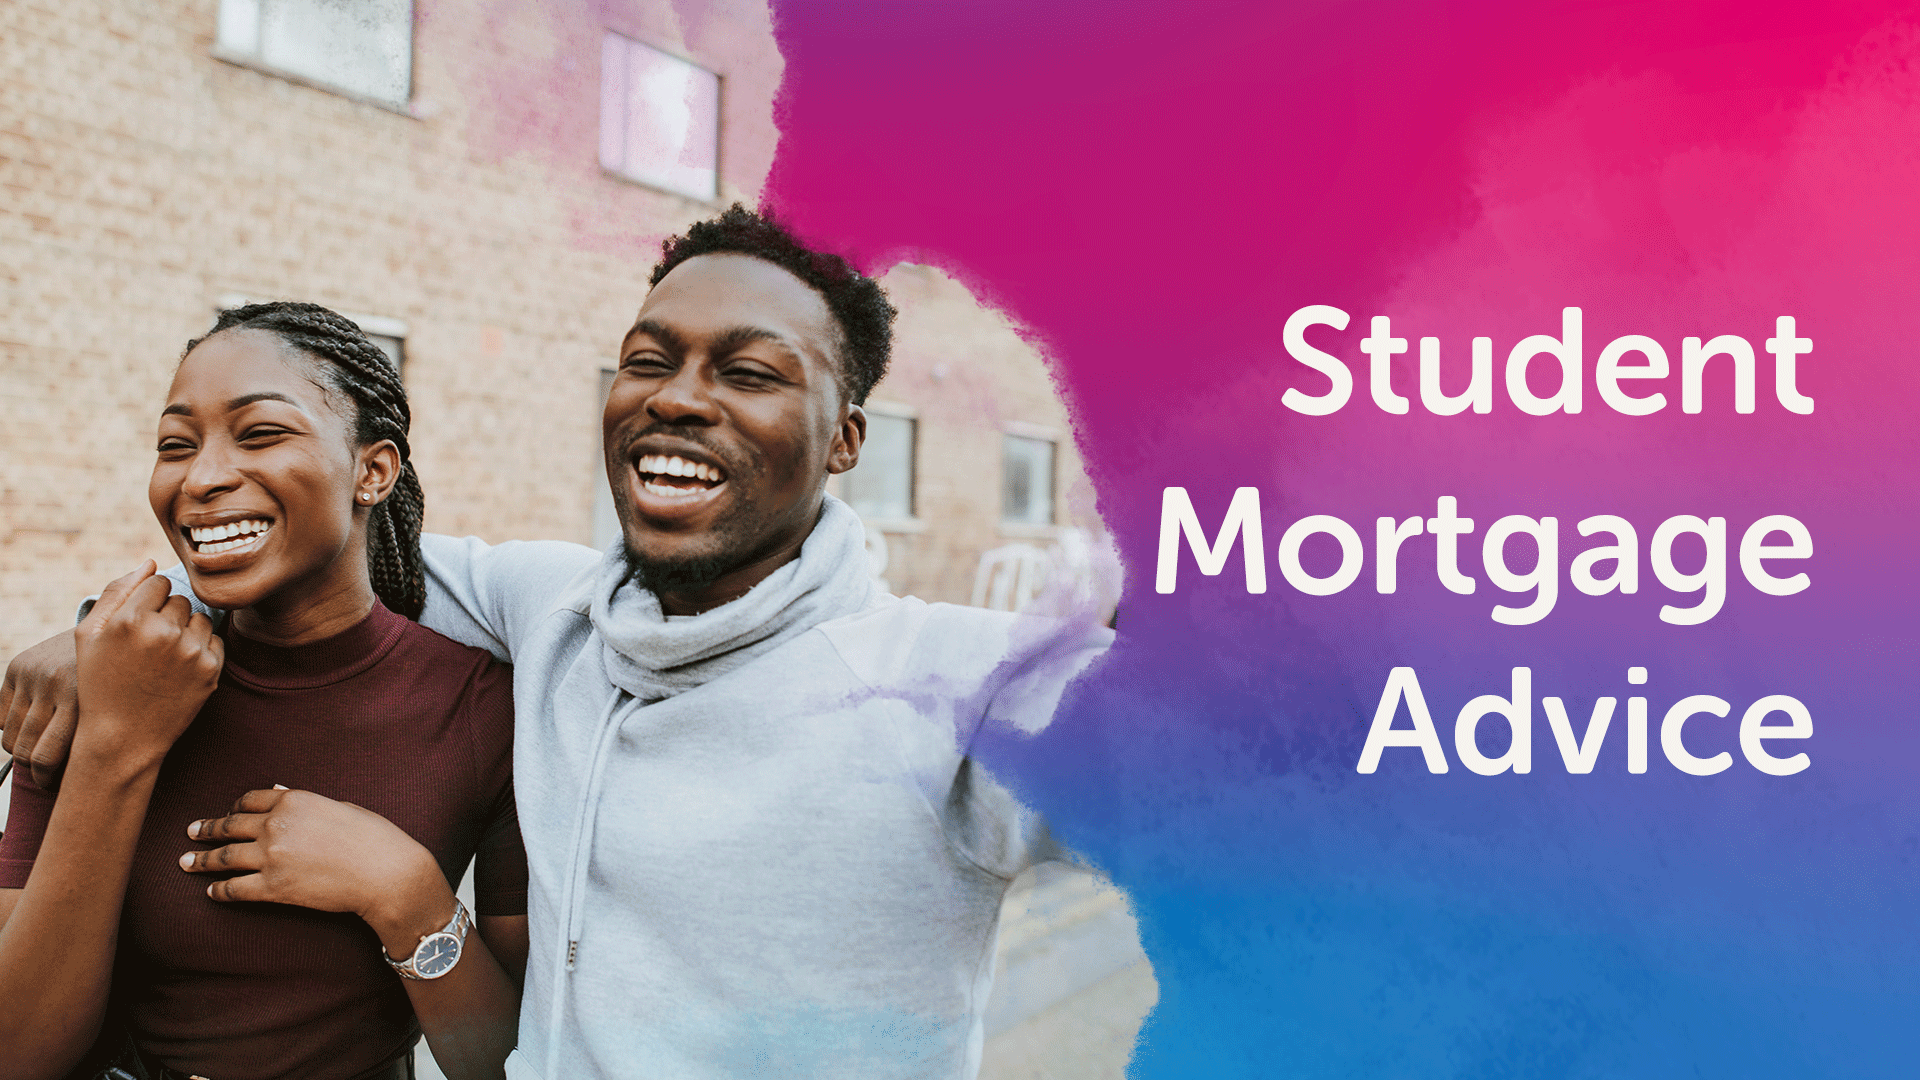 Student Mortgages